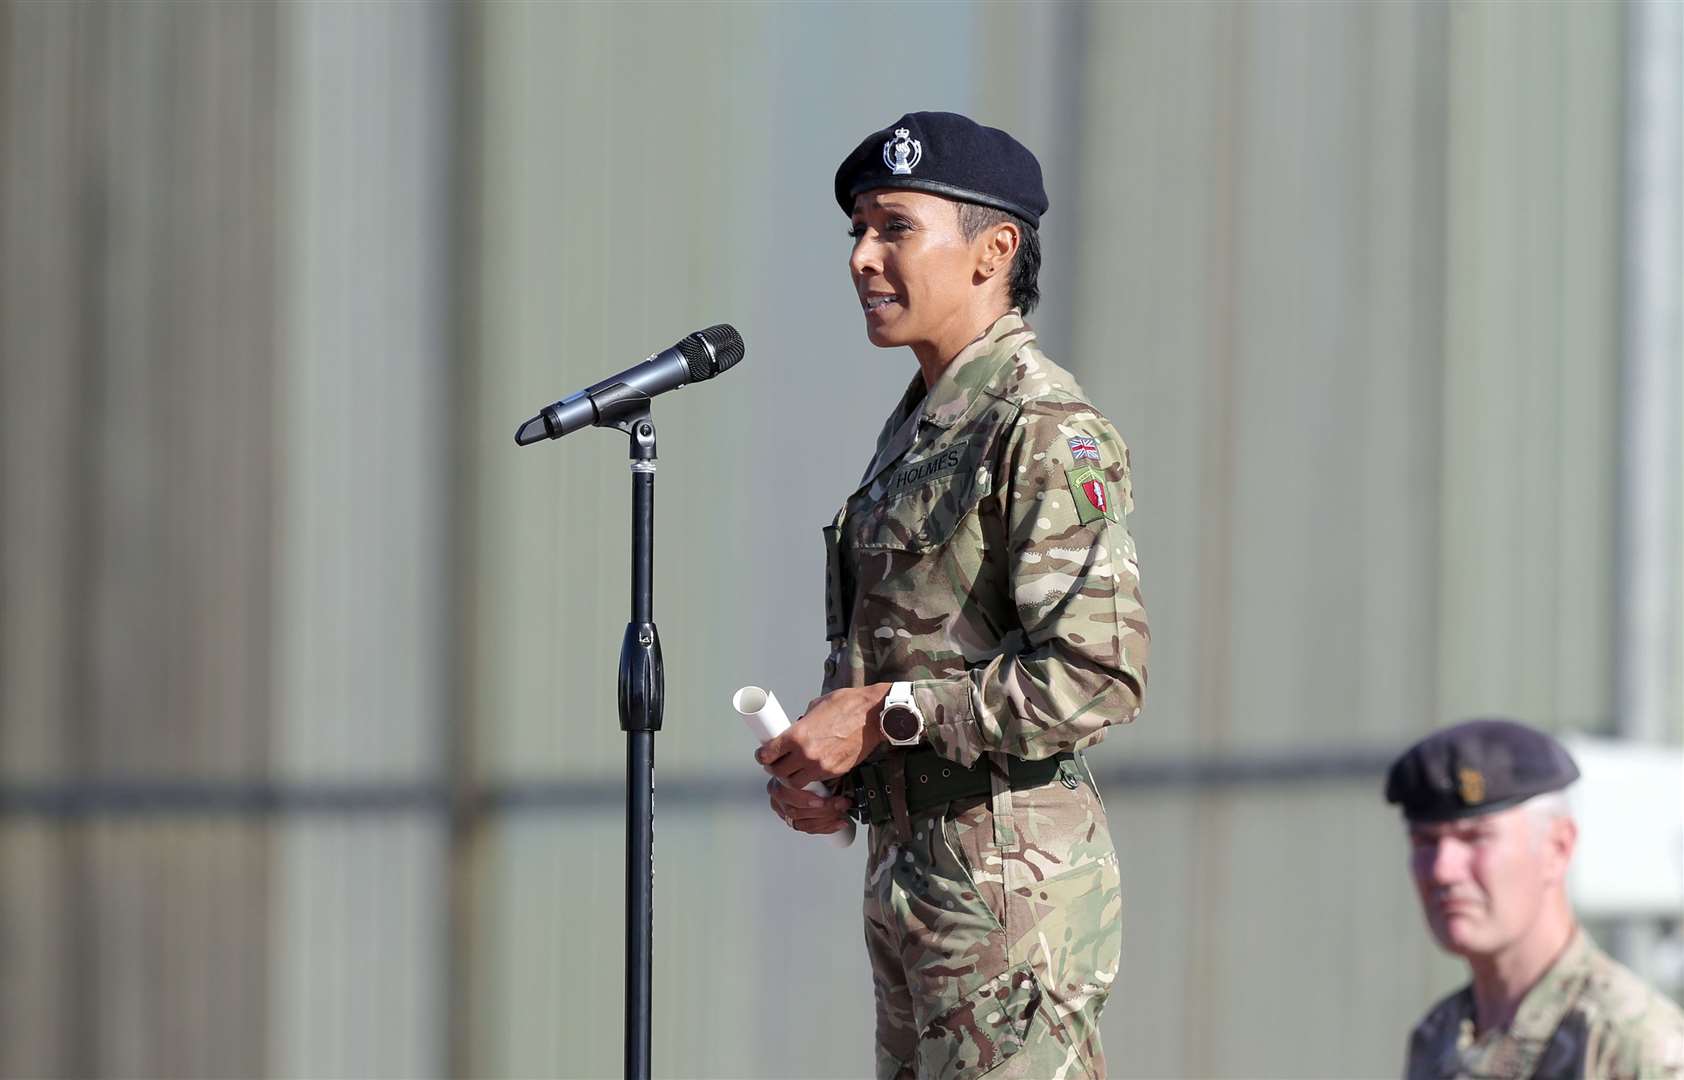 The double Olympic champion said she feared repercussions from the army (Andrew Matthews/PA Images)